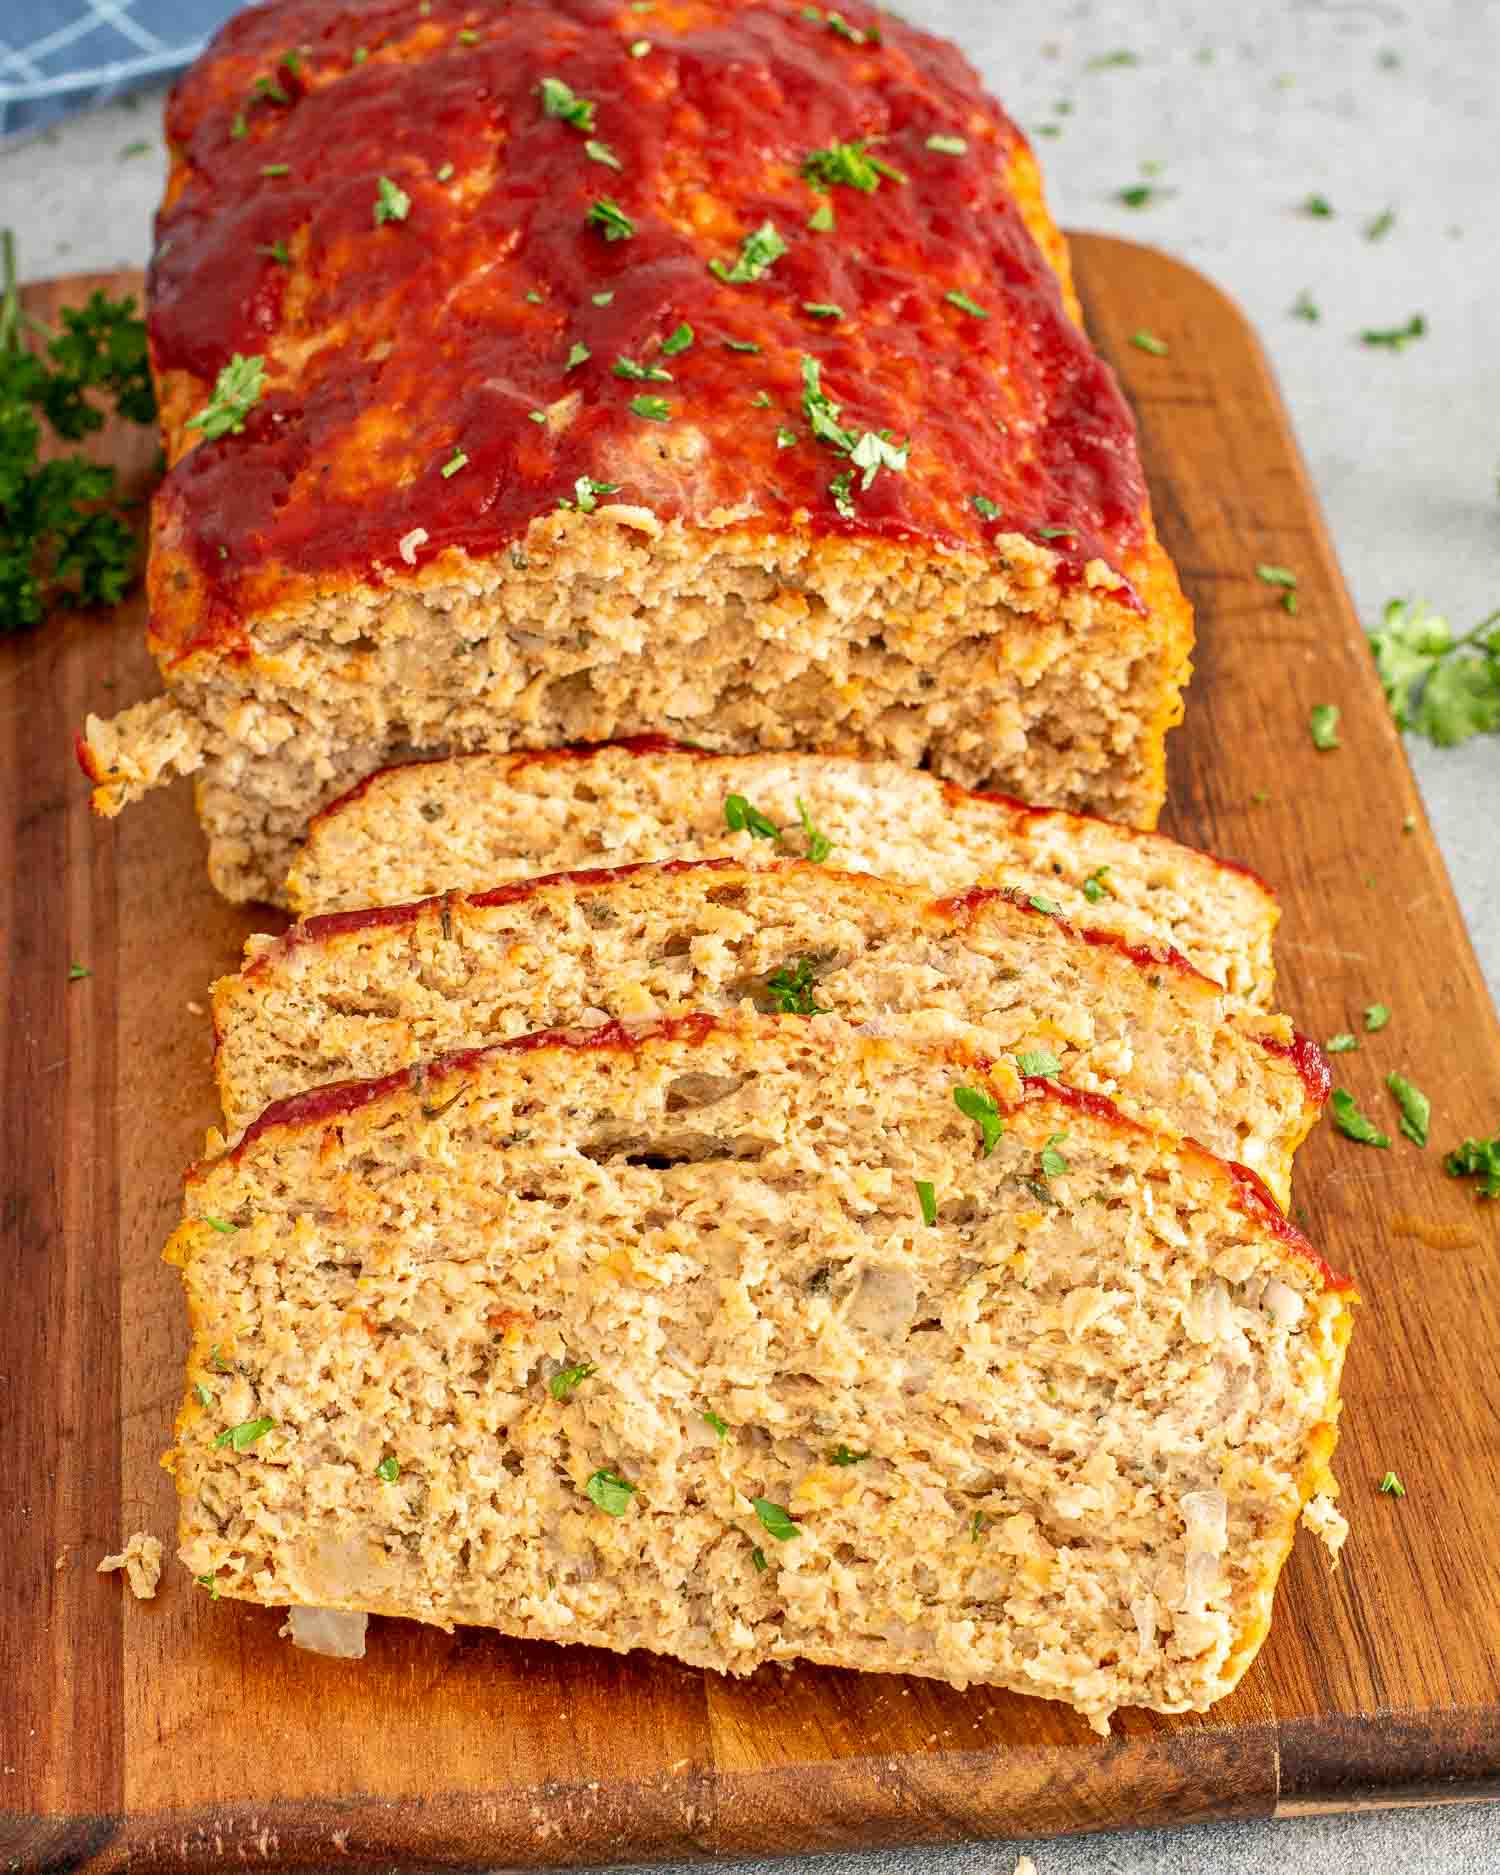 sliced up chicken meatloaf on a cutting board garnished with parsley.